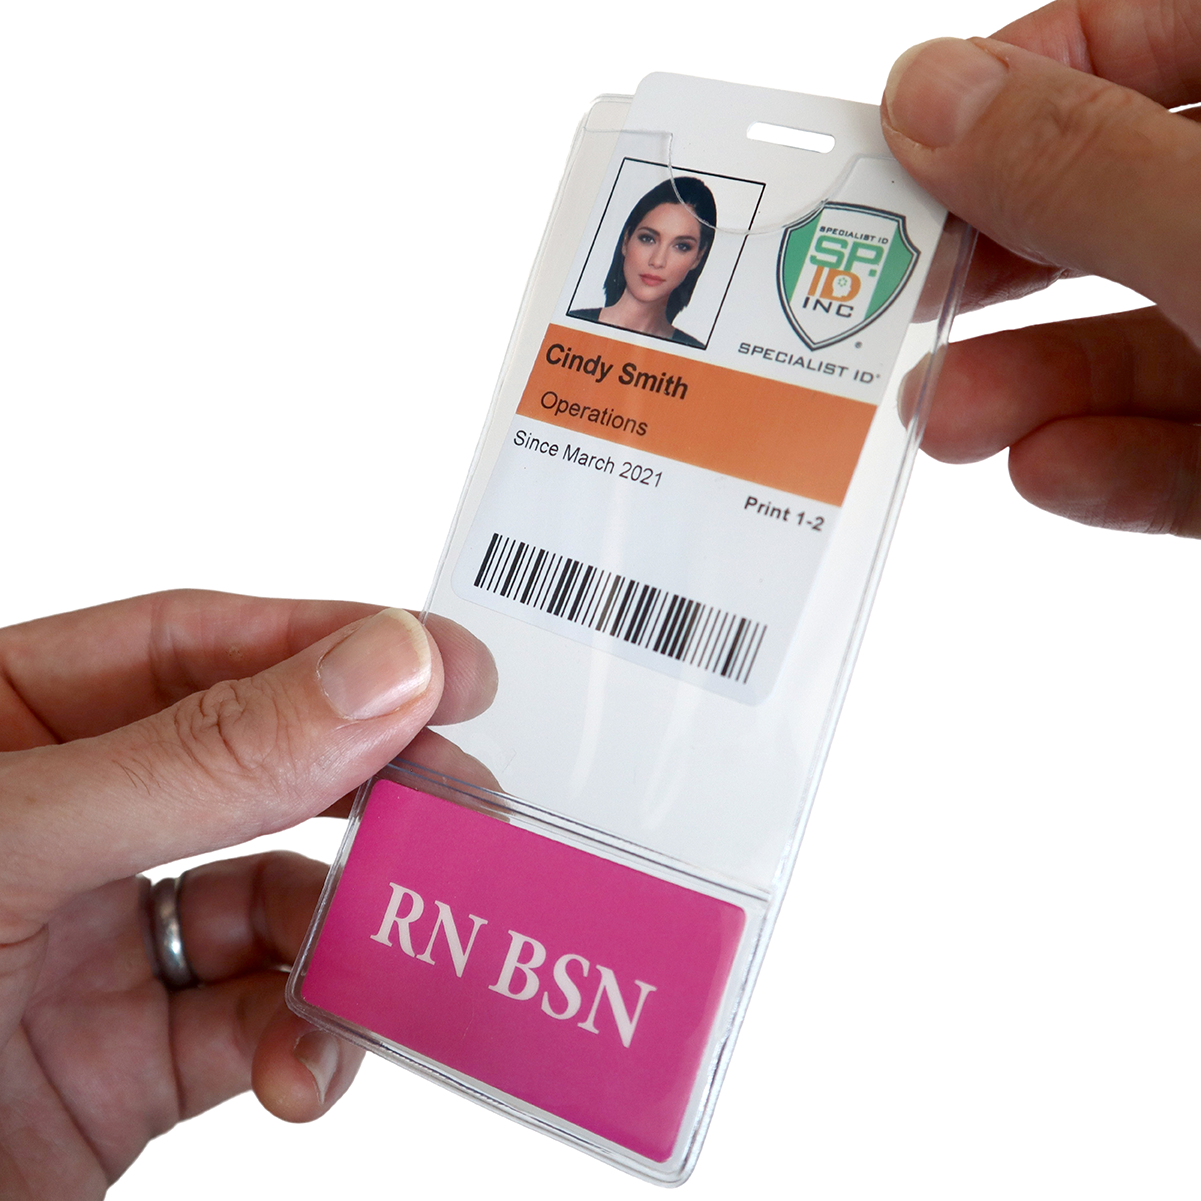 RN BSN BadgeBottom Badge Holder & Badge Buddy IN ONE!! - Vertical ID Badge Sleeve with Bottom Role Tag for Registered Nurses